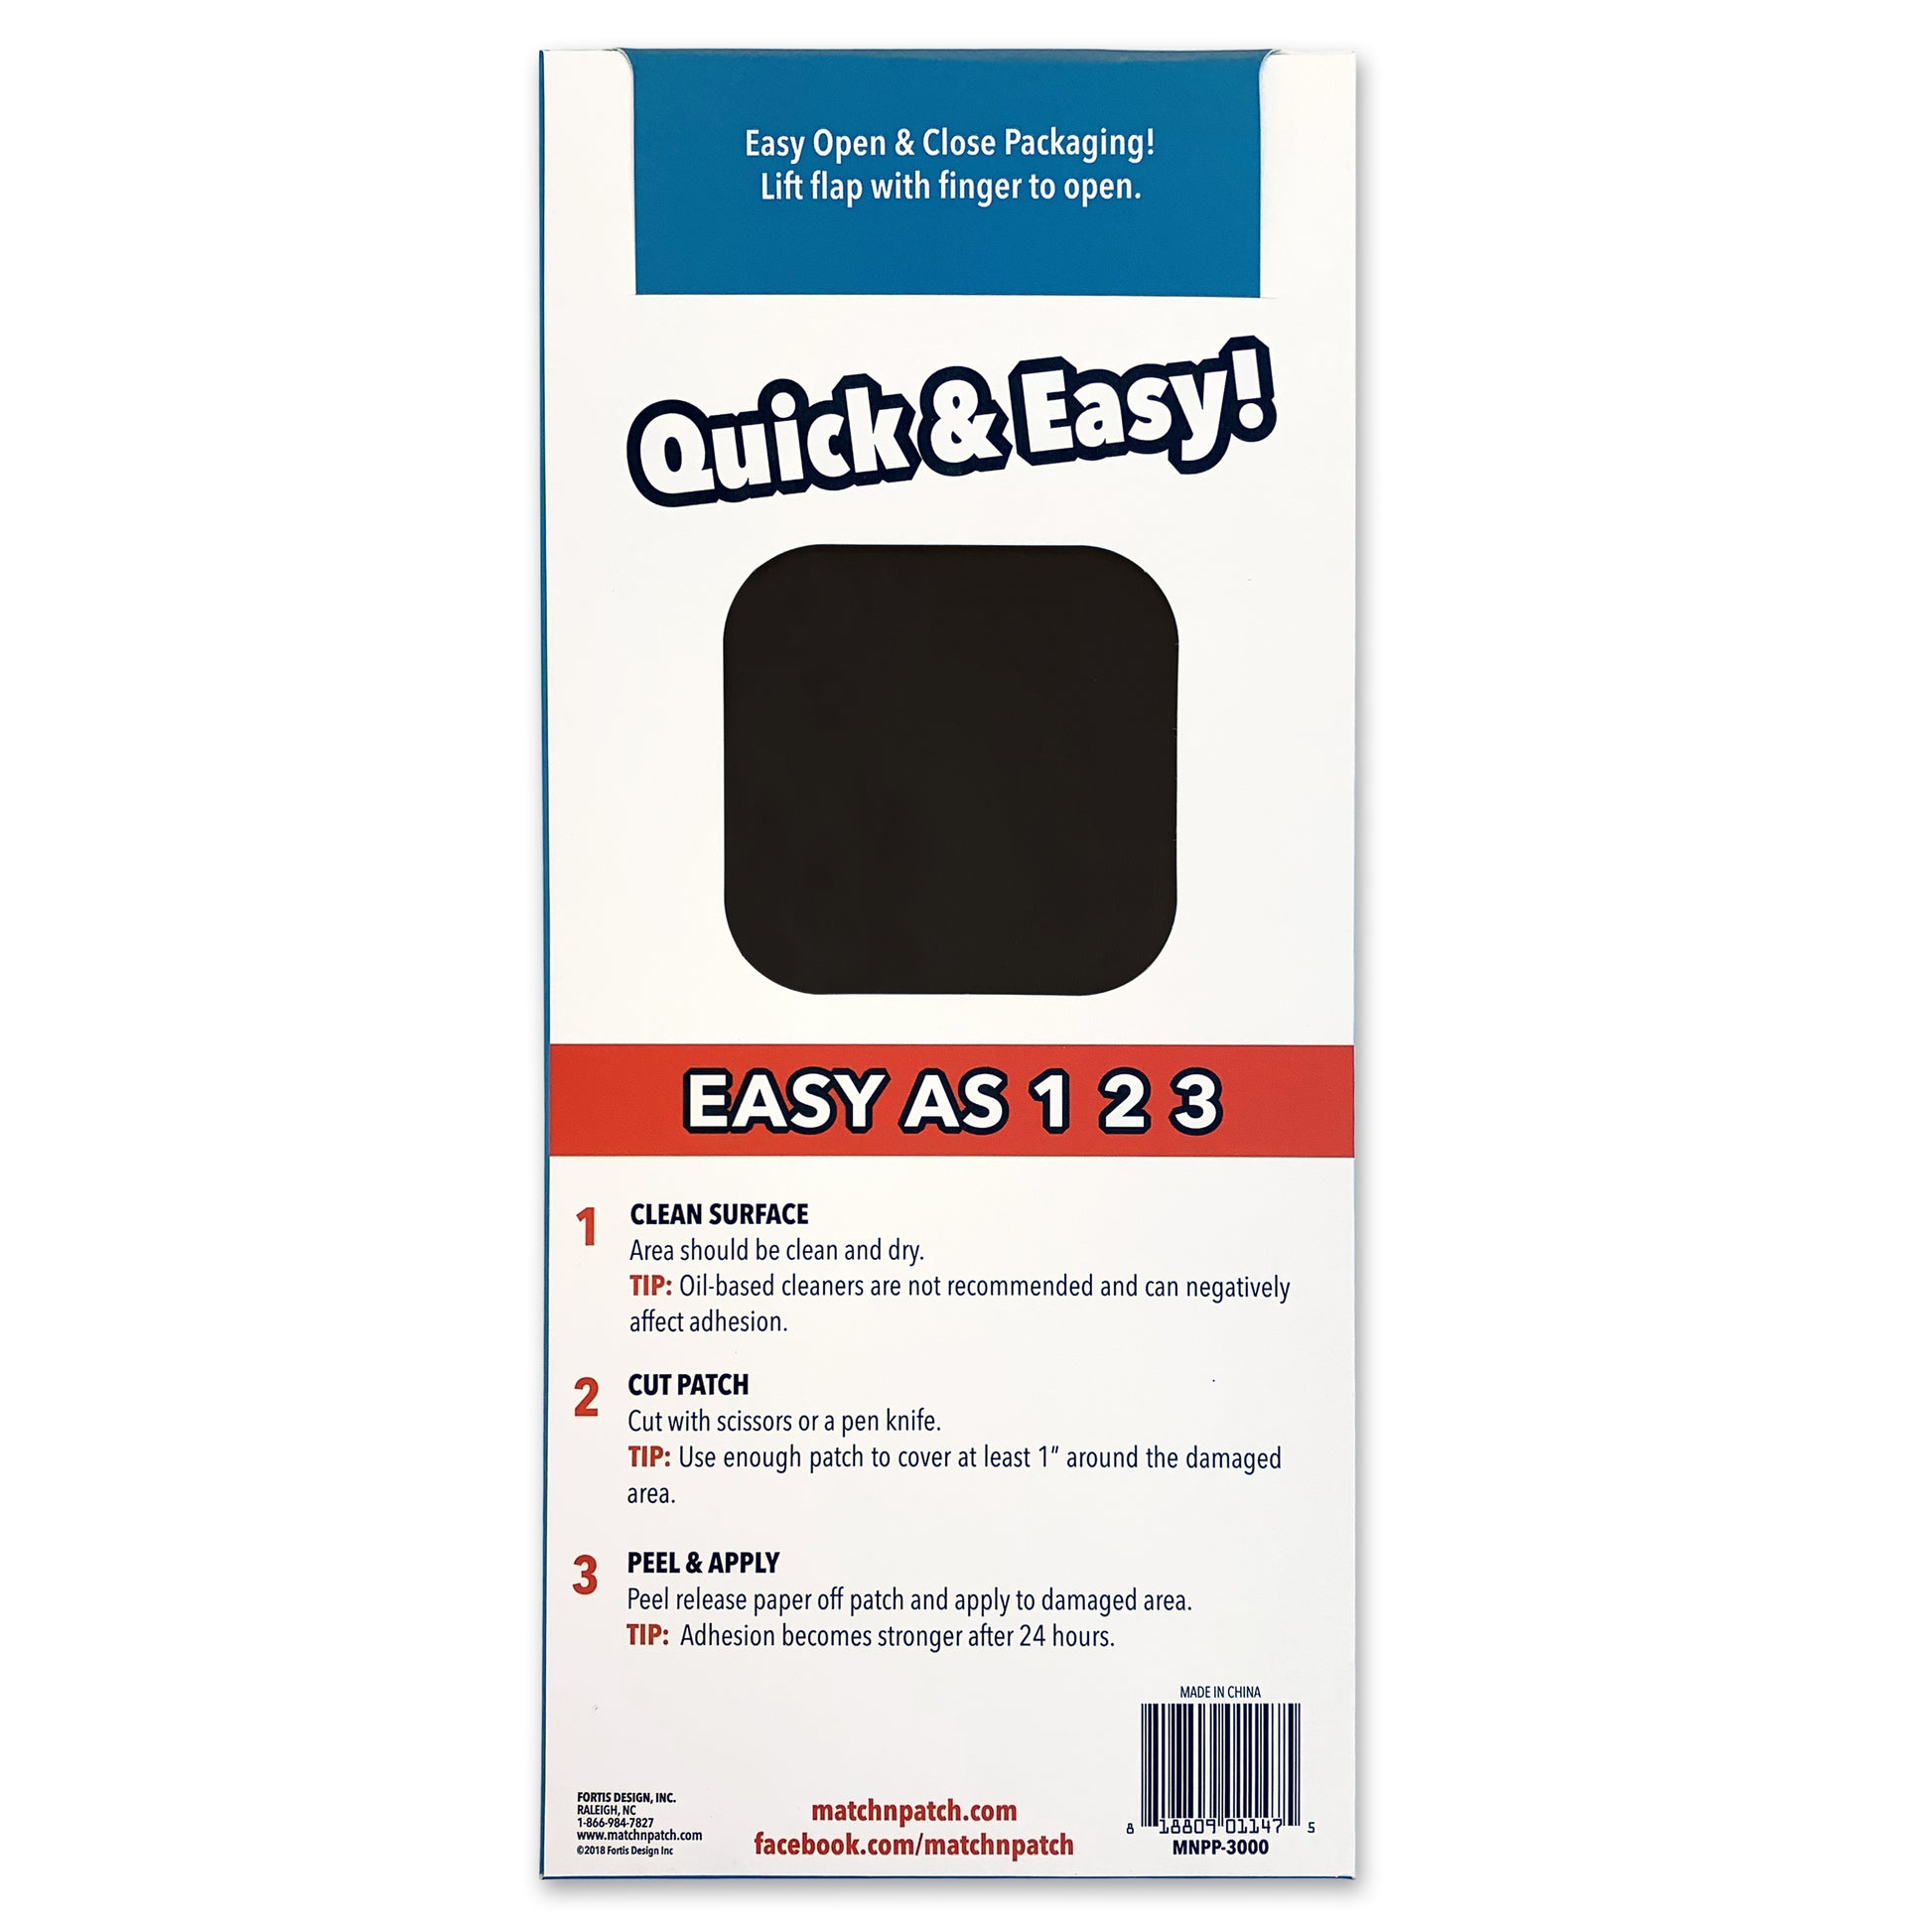 Black Leather Repair Tape – Match 'N Patch